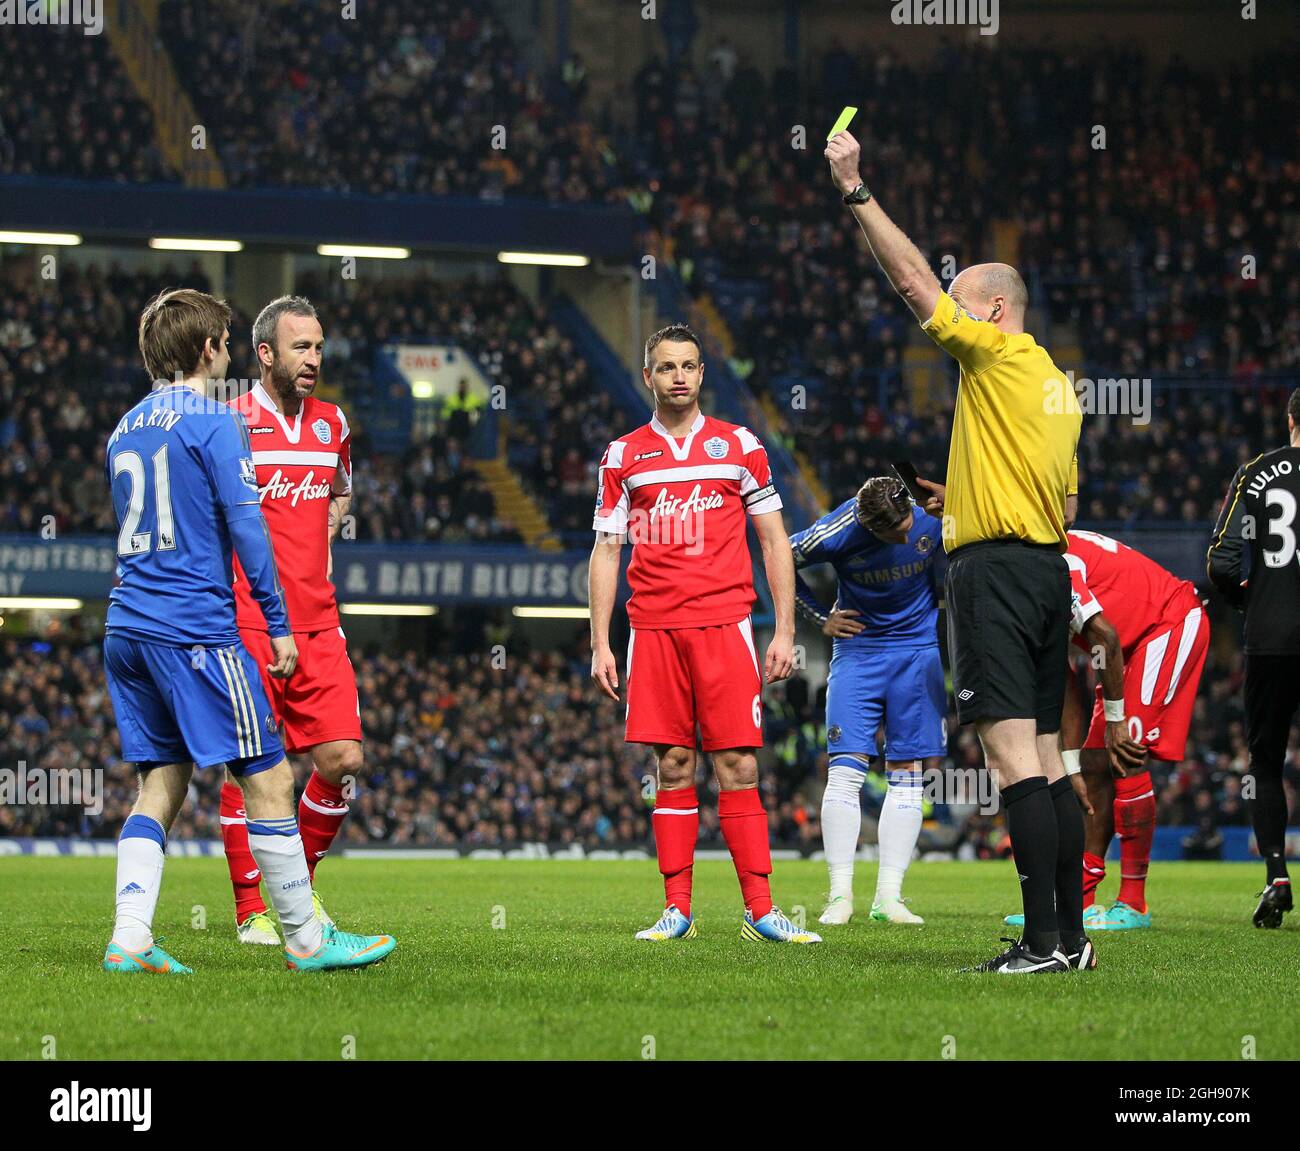 QPR's Clint Hill looks on in amazement as Chelsea's Marko Marin receives a booking for a tackle on Stephane Mbia during the Barclays Premier League match between Chelsea and QPR at Stamford Bridge on January 2, 2013 in London. Stock Photo